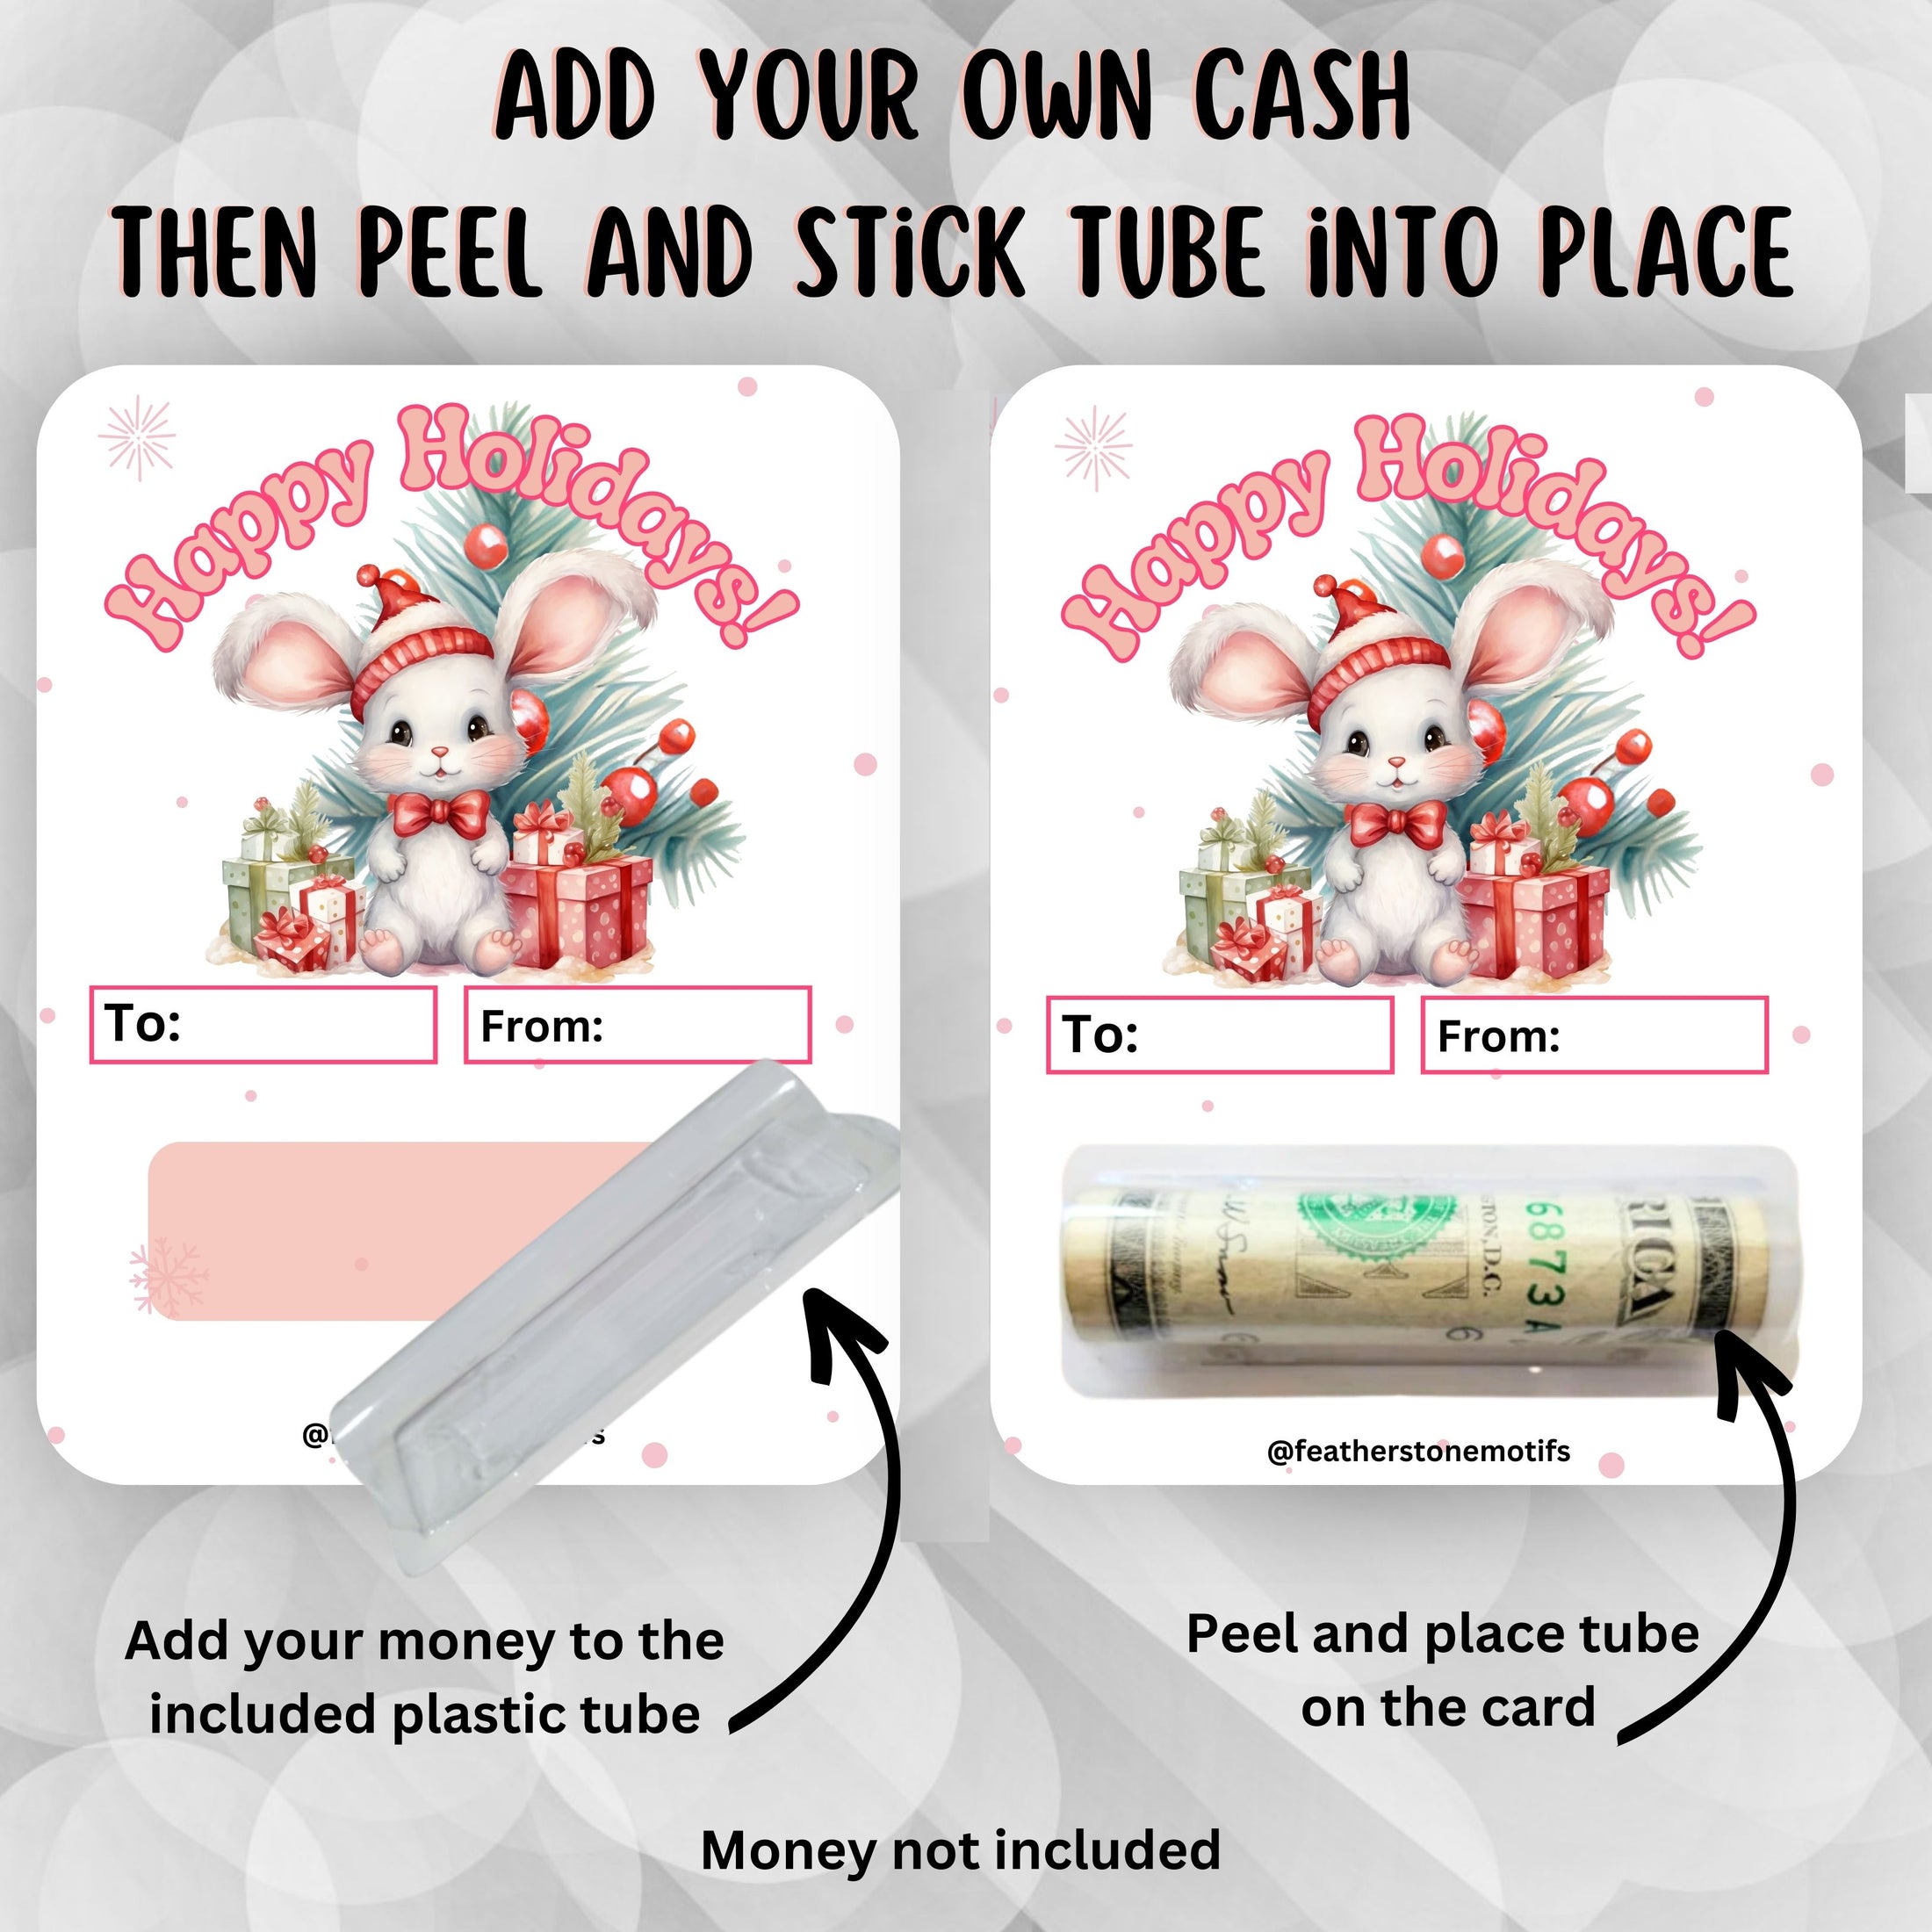 This image shows how to attach the money tube to the Holiday Bunny money card.